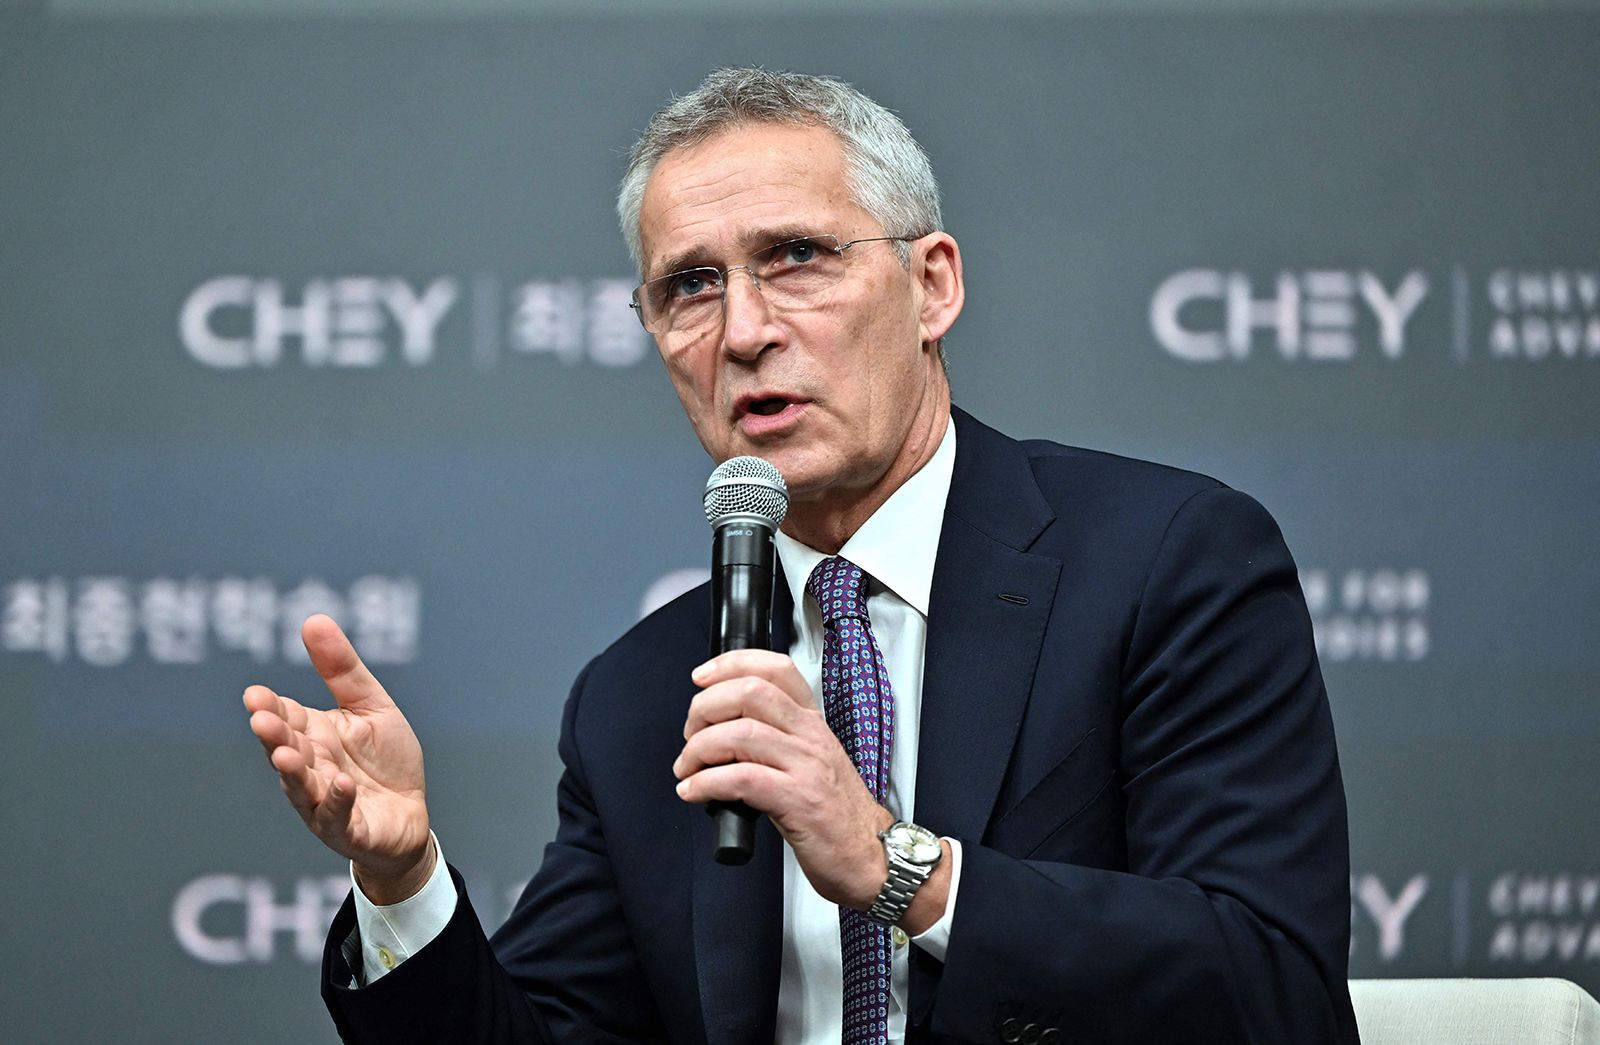 NATO secretary general urges South Korea to allow direct arms exports to Ukraine